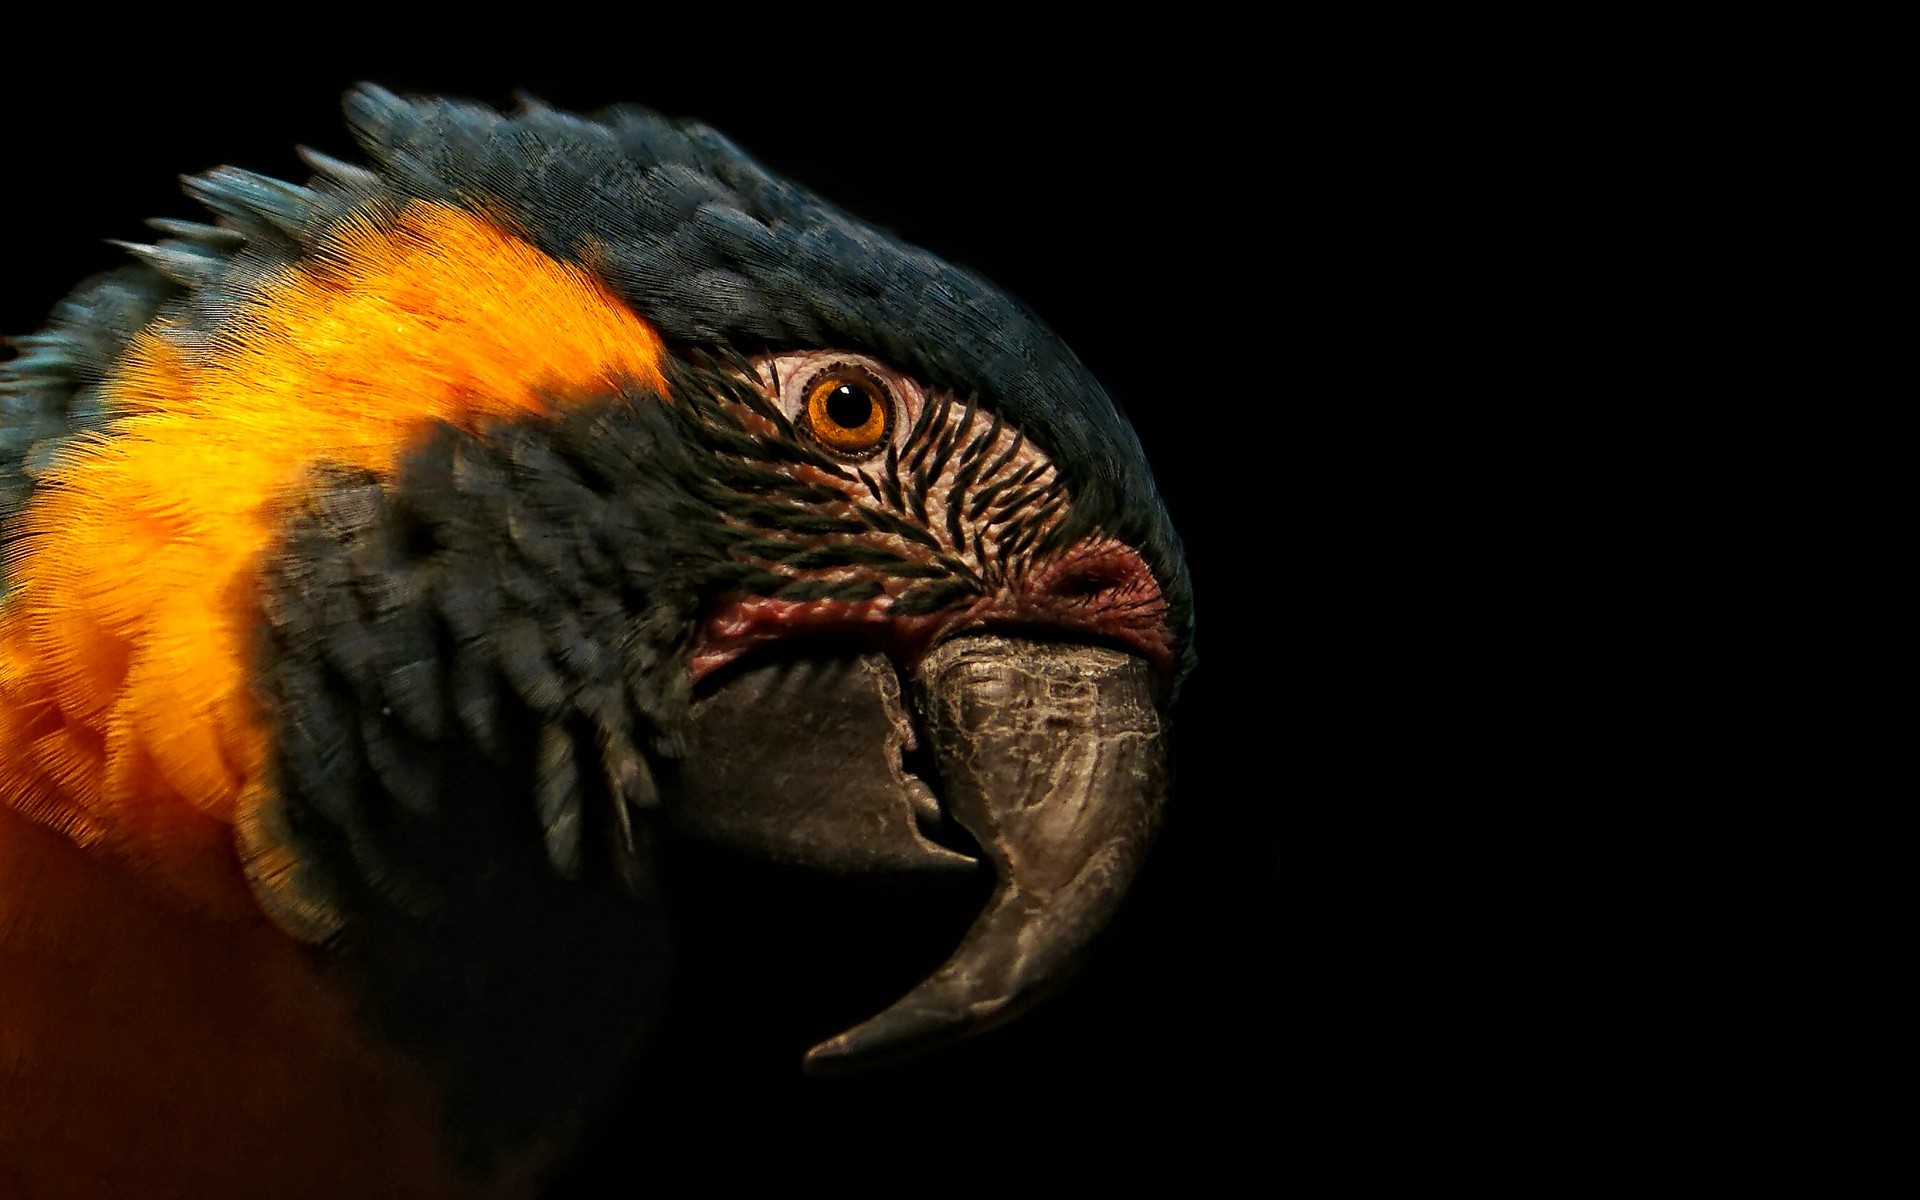 animals, Birds, Parrot, Tropical, Color, Face, Eyes, Stare, Feathers, Beak, Wildlife Wallpaper